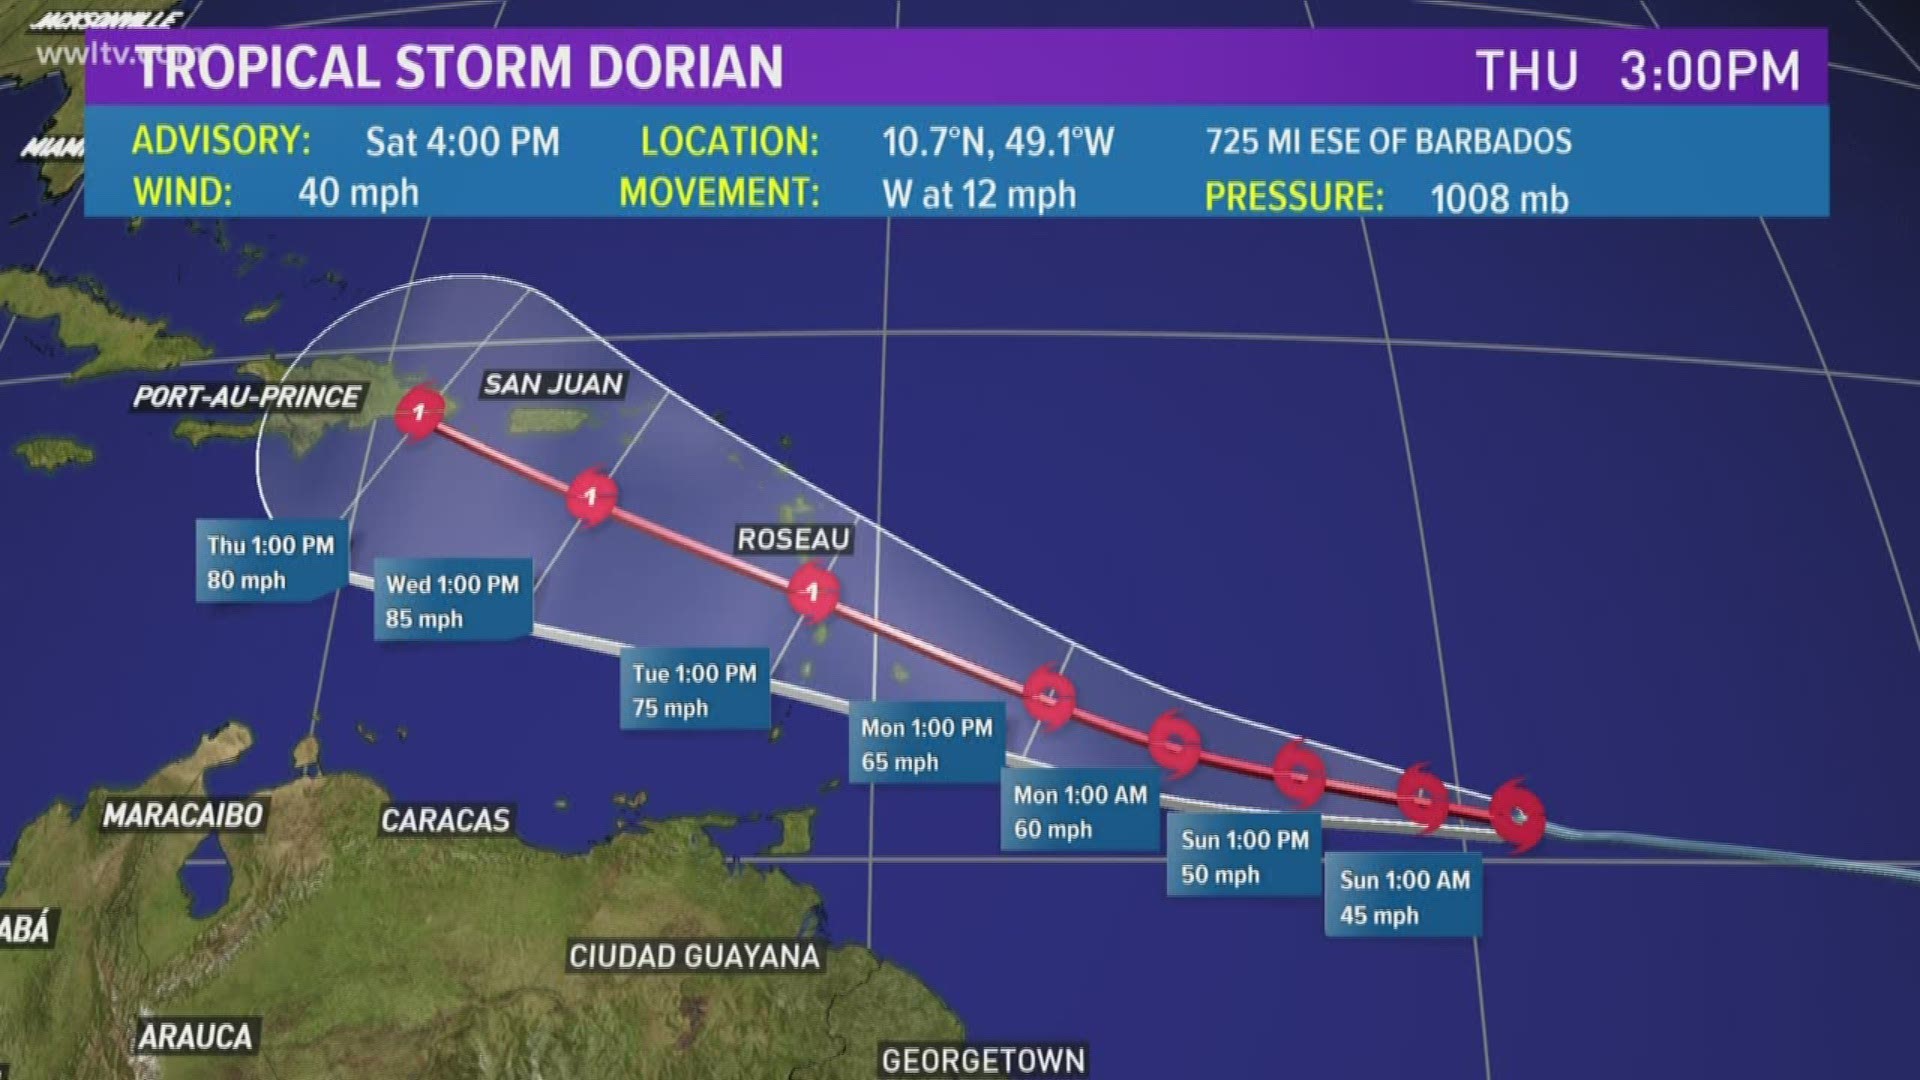 Tropical Storm Dorian has formed in the Atlantic and the forecast is for it to become a hurricane.